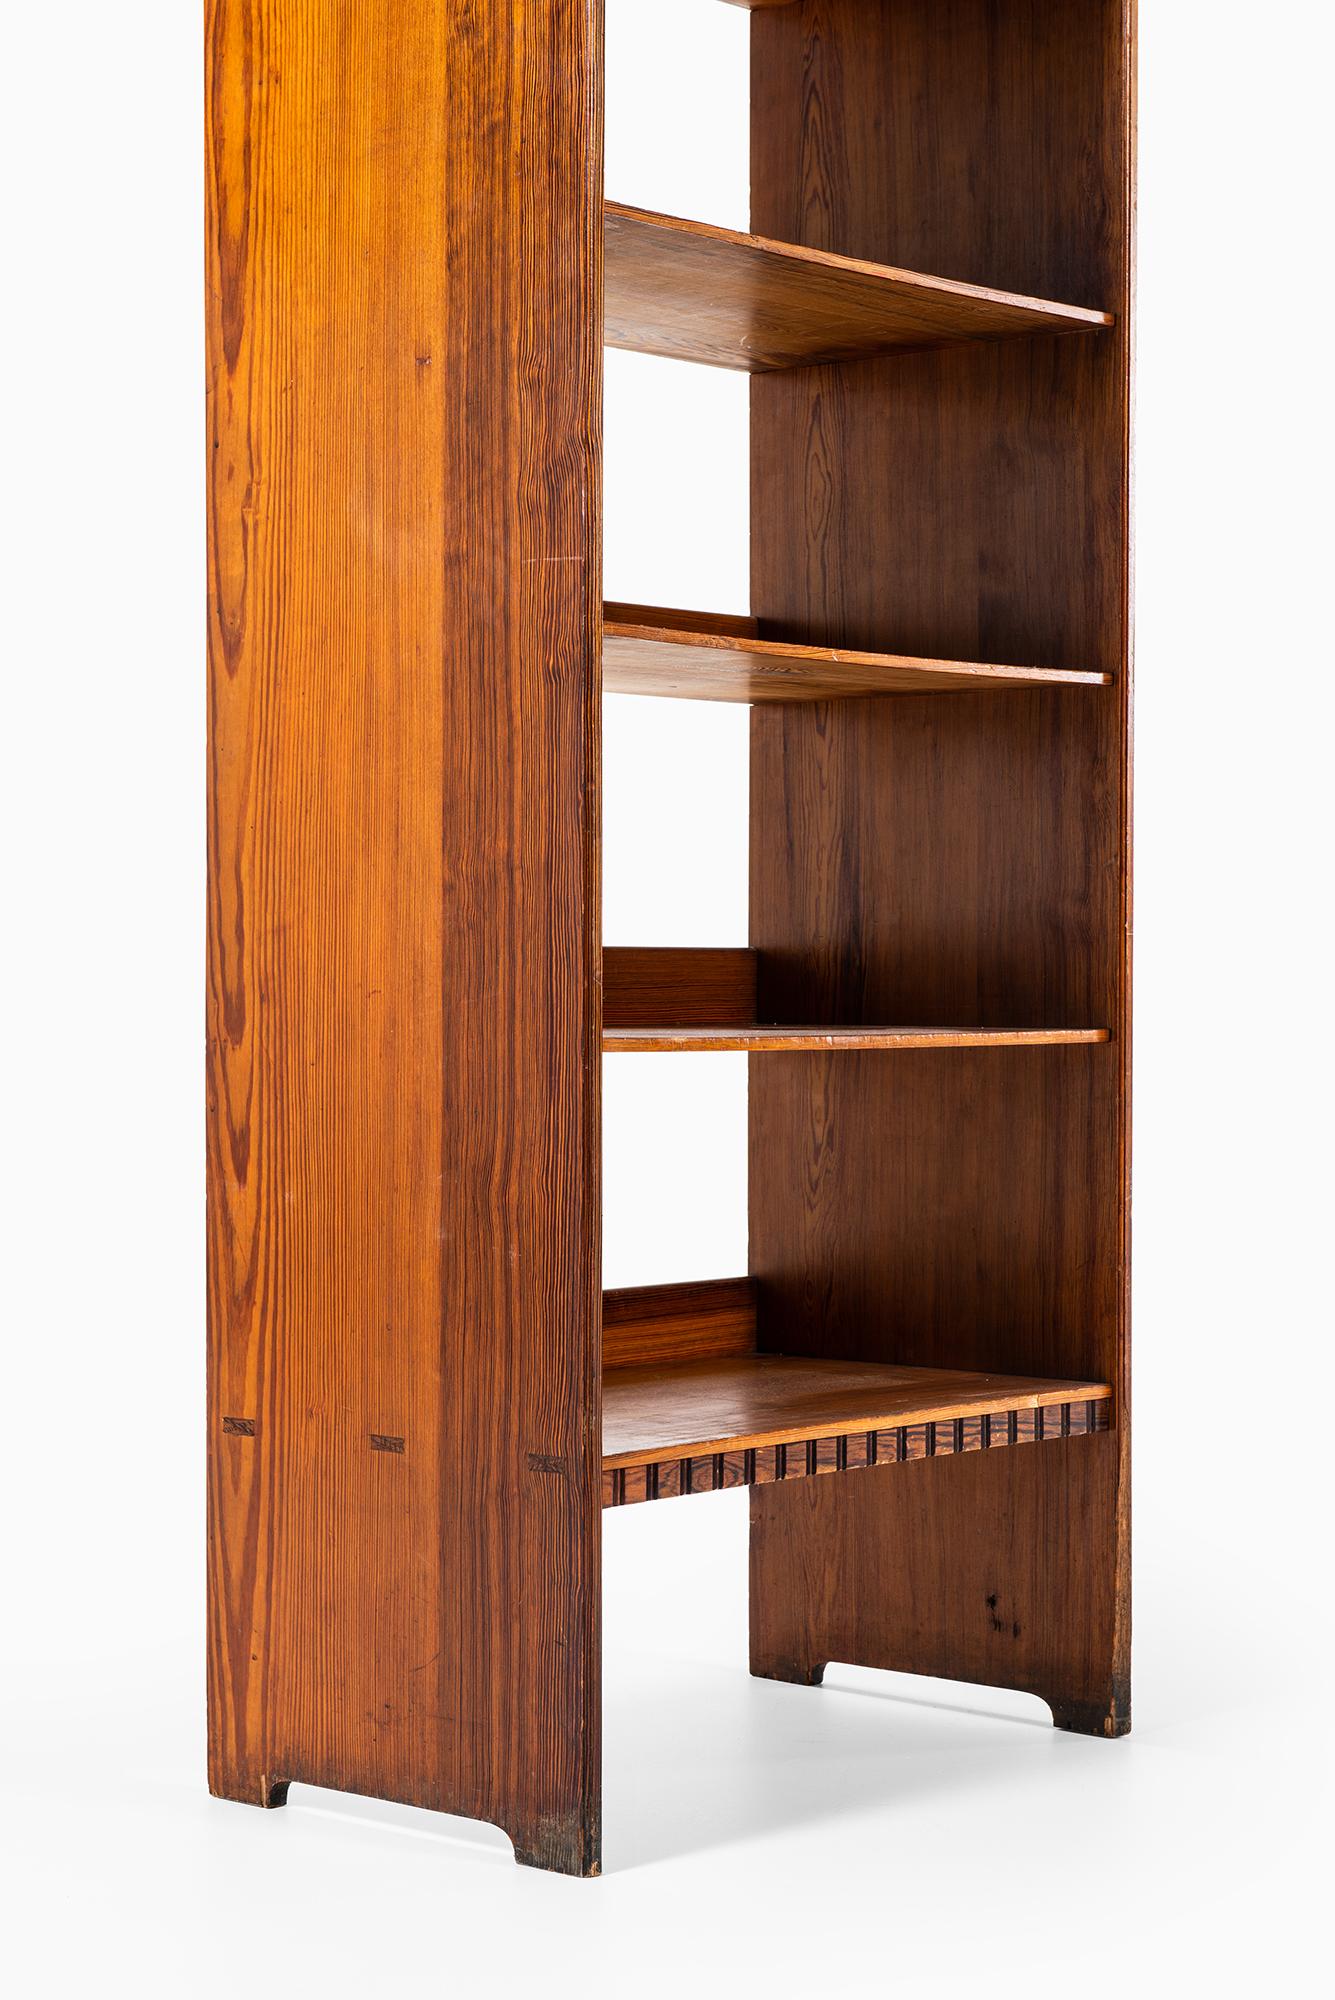 Martin Nyrop Bookcases in Oregon Pine Produced by Rud Rasmussen in Denmark 1